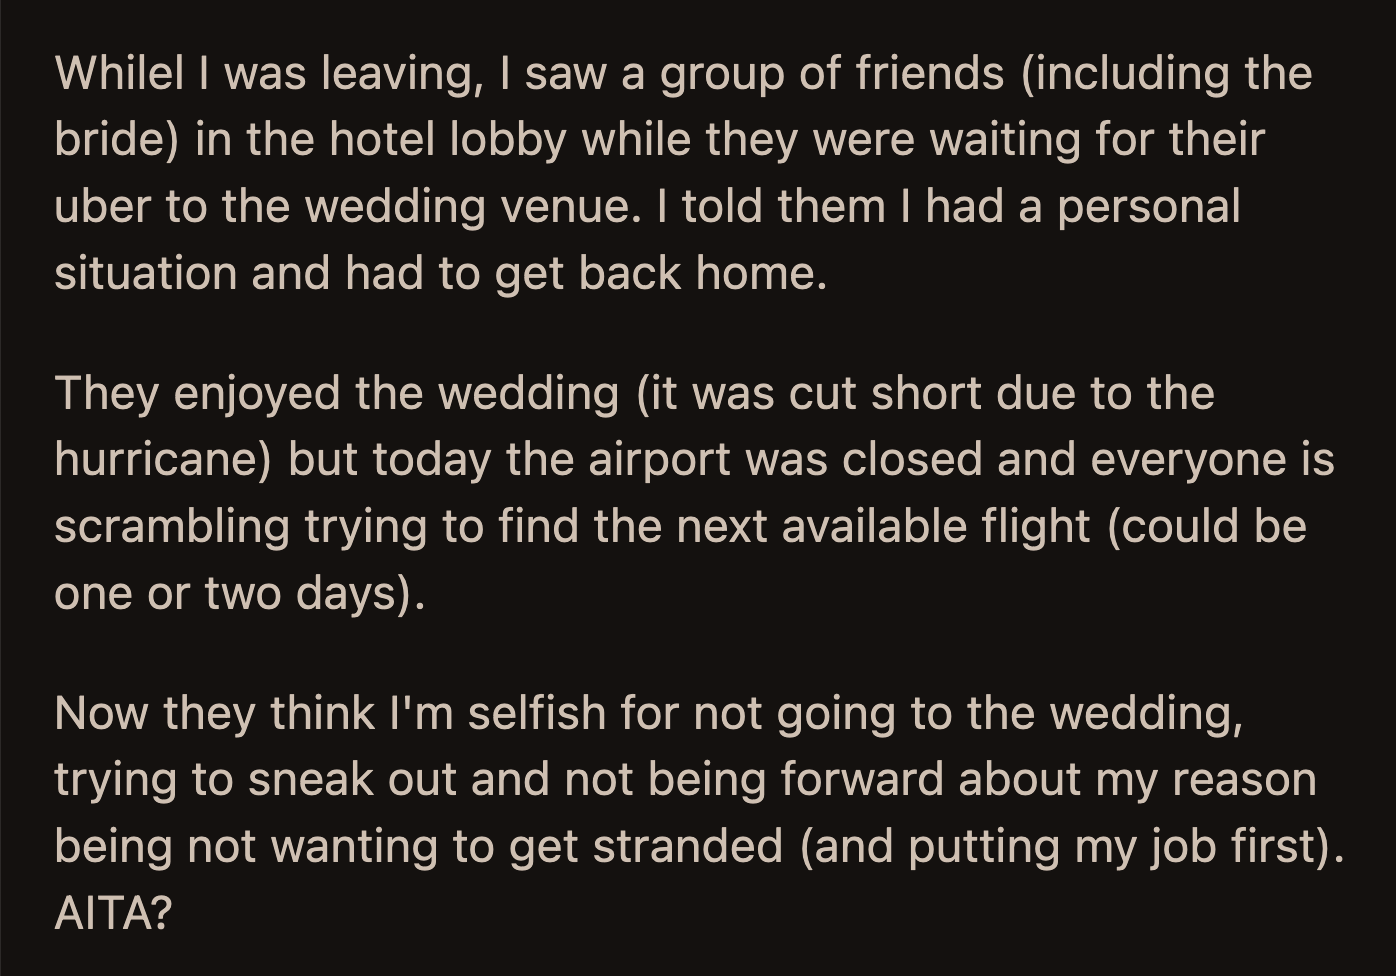 However, their attempt to sneak out of the hotel unnoticed and their vague explanation of why they were leaving made the OP feel like a jerk.